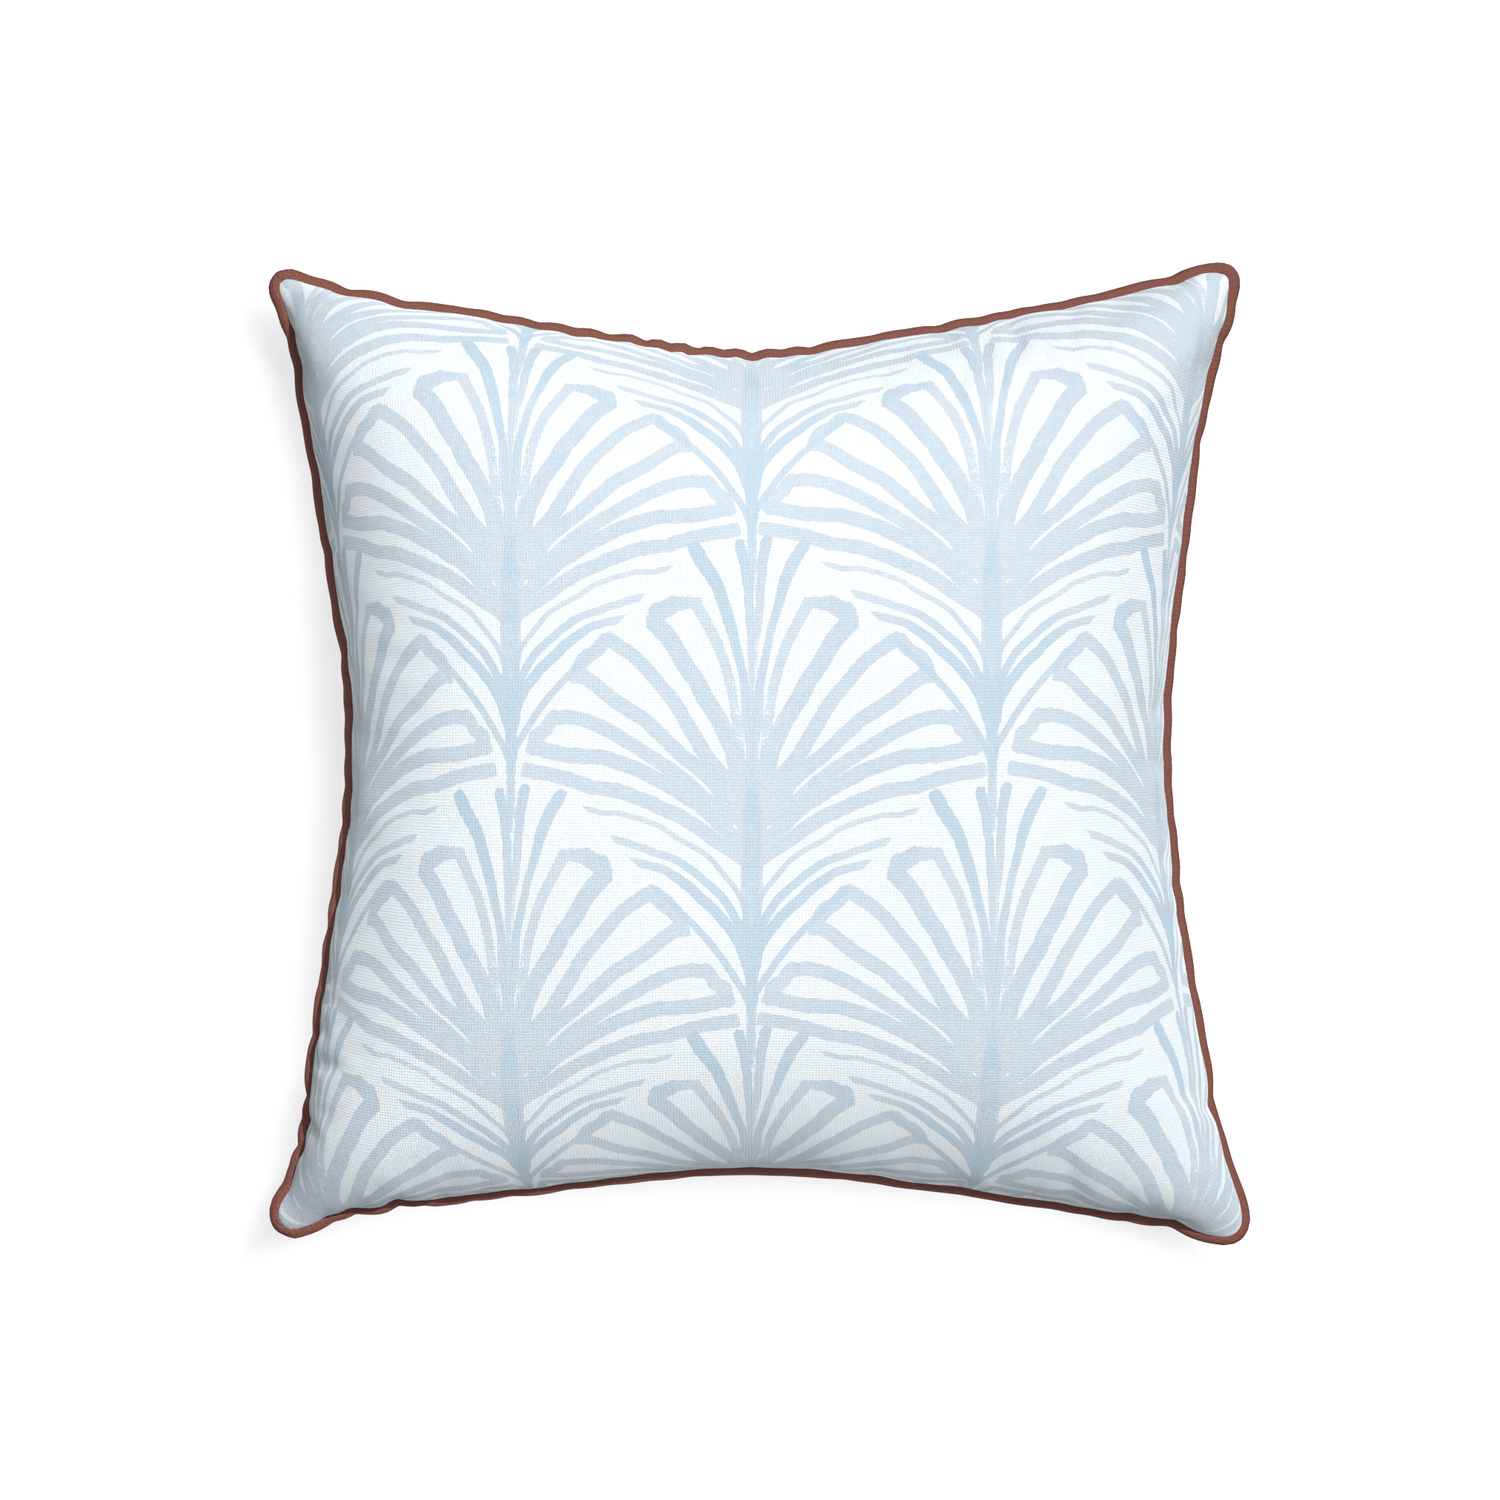 22-square suzy sky custom pillow with w piping on white background